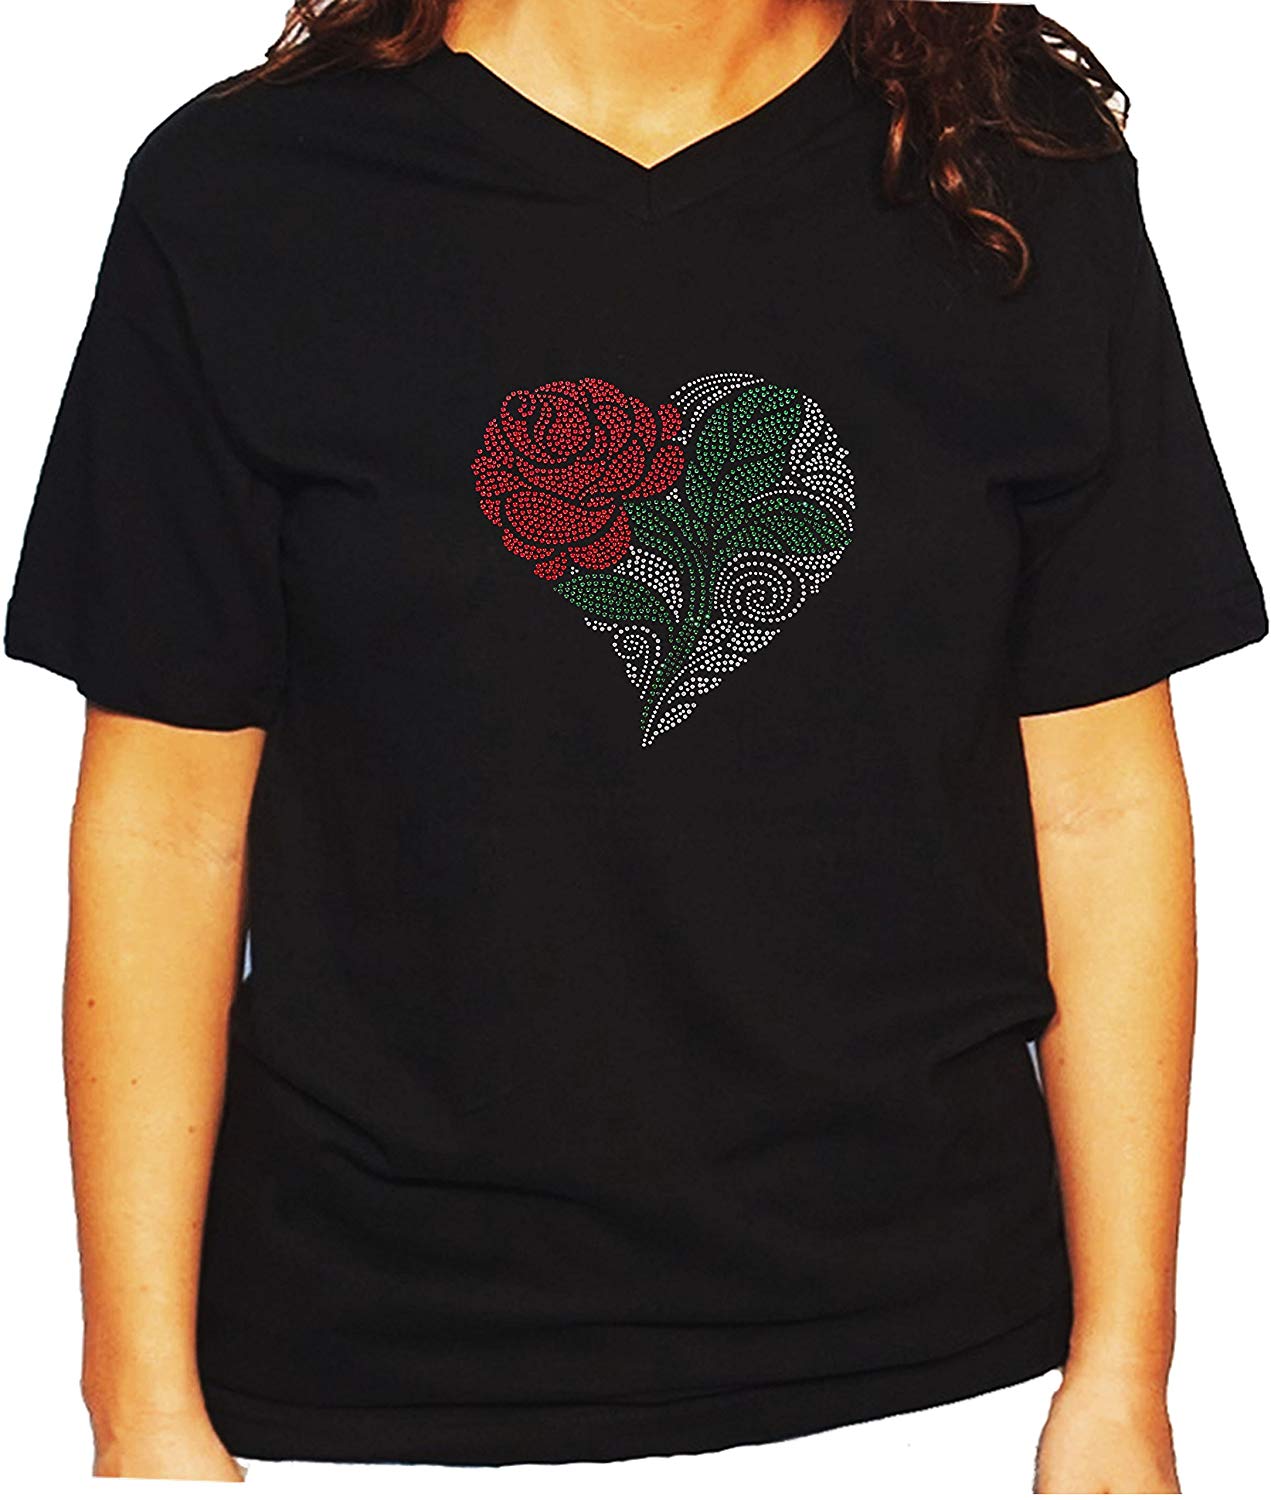 Women's / Unisex T-Shirt with Heart With Rose and Green Leaf In Rhinestones